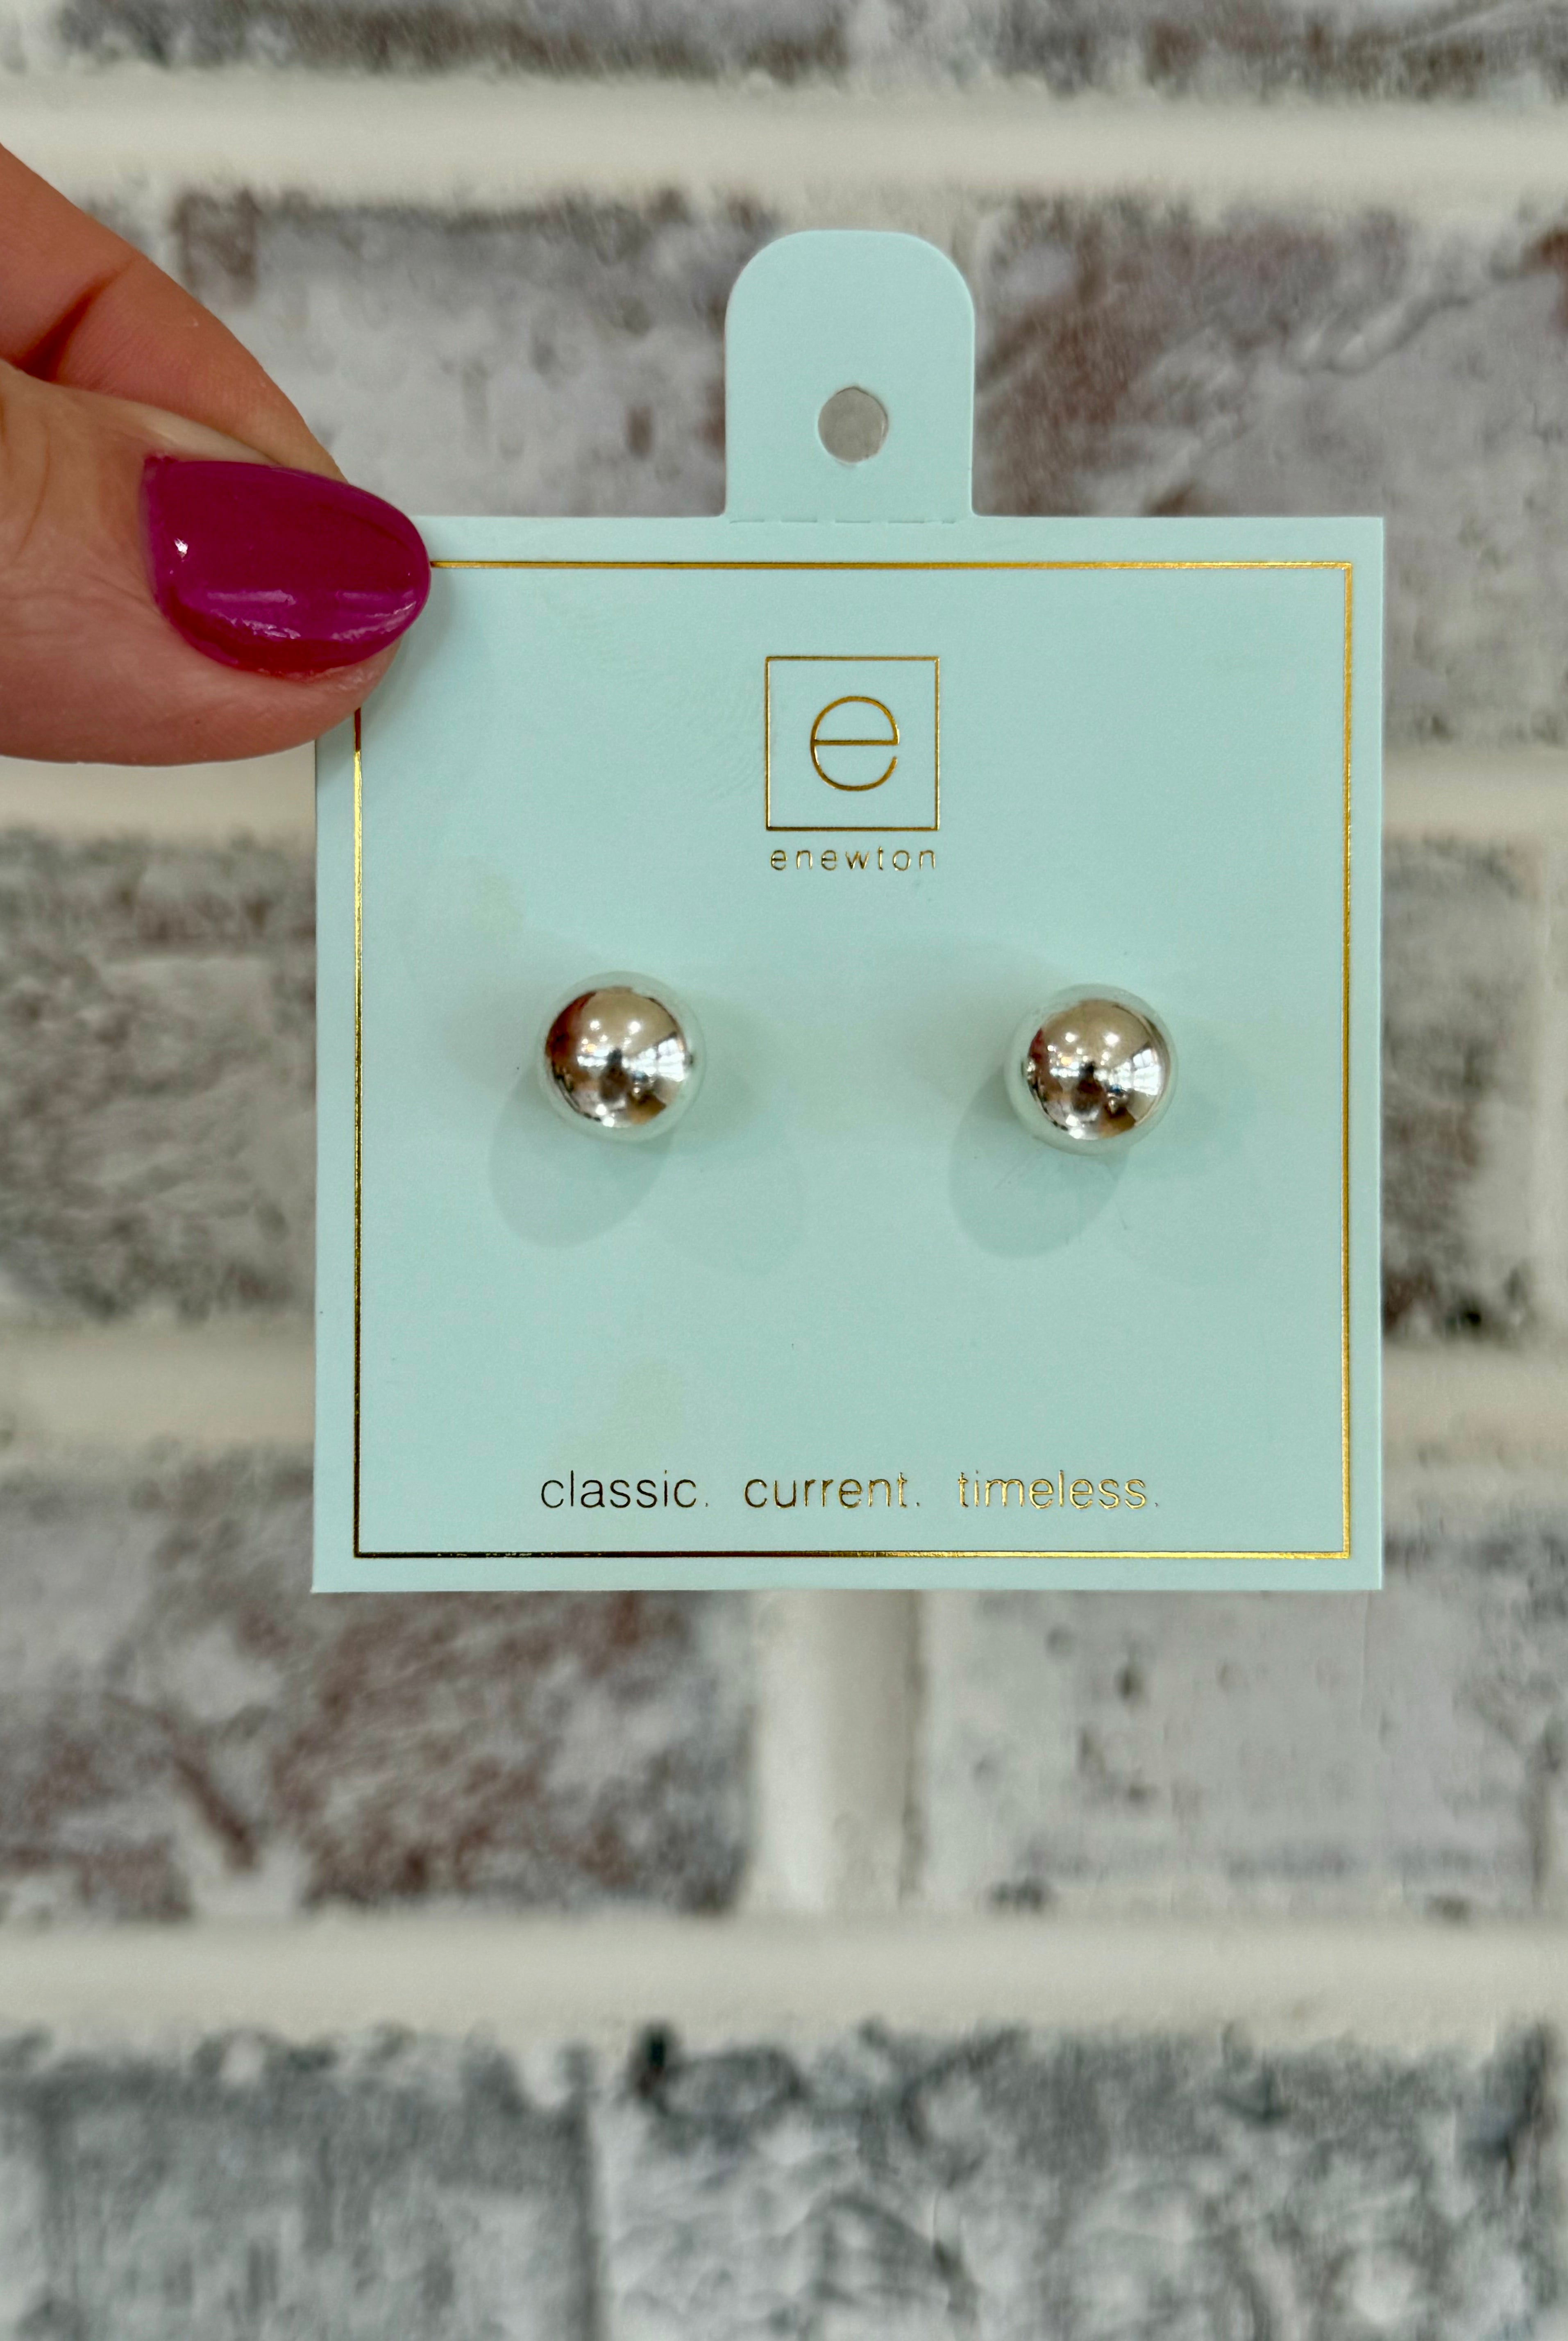 Classic 10mm Silver Ball Stud Earring-Earrings-eNewton-The Lovely Closet, Women's Fashion Boutique in Alexandria, KY